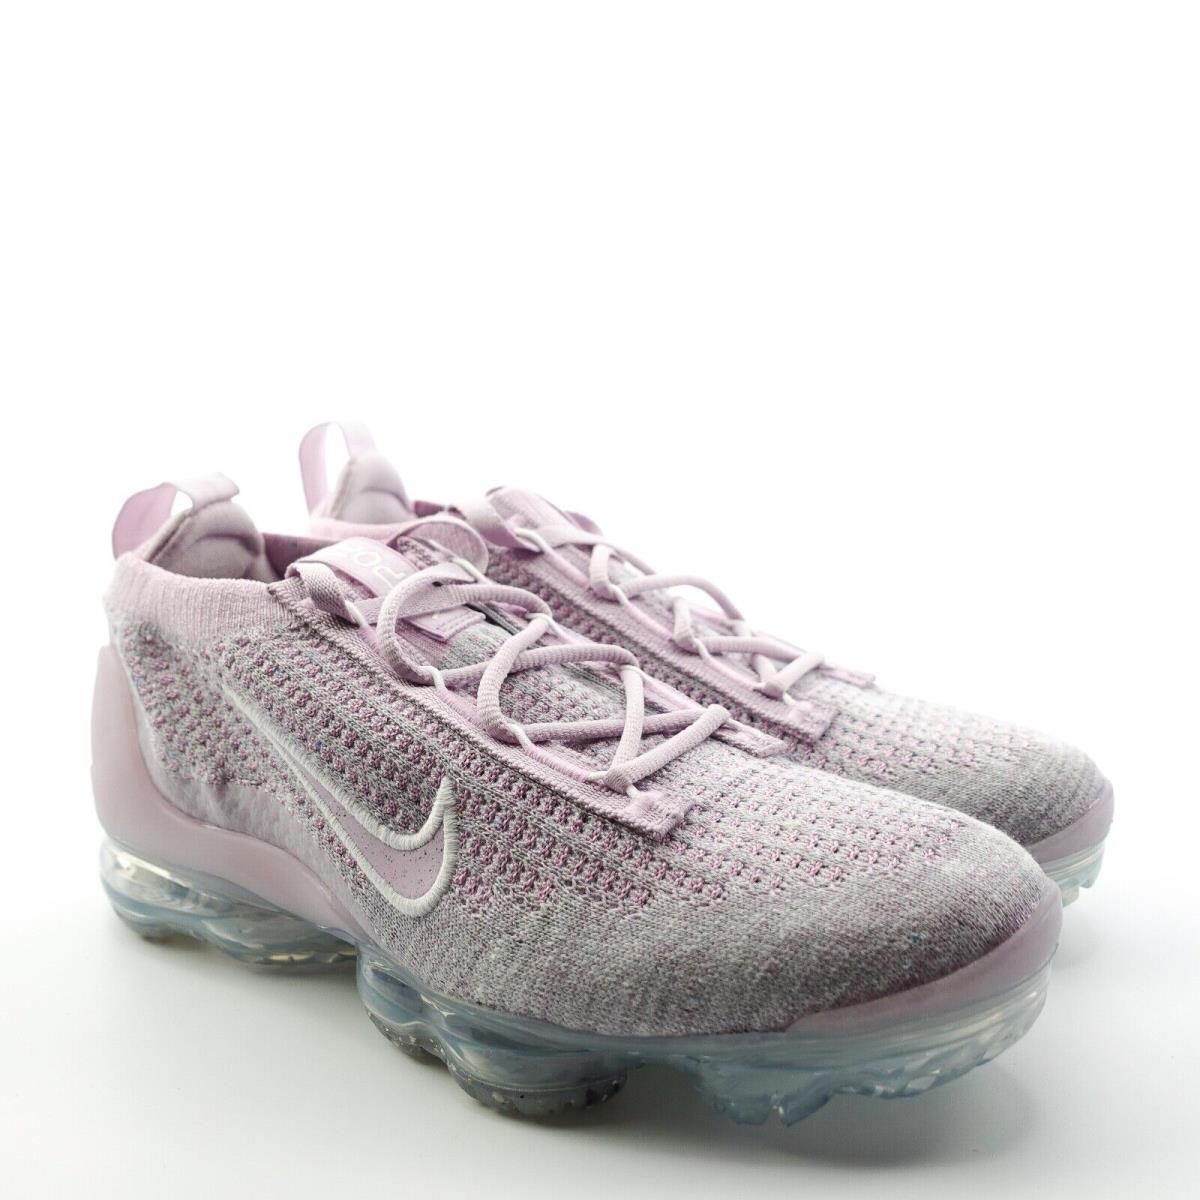 nike vapormax pink and purple